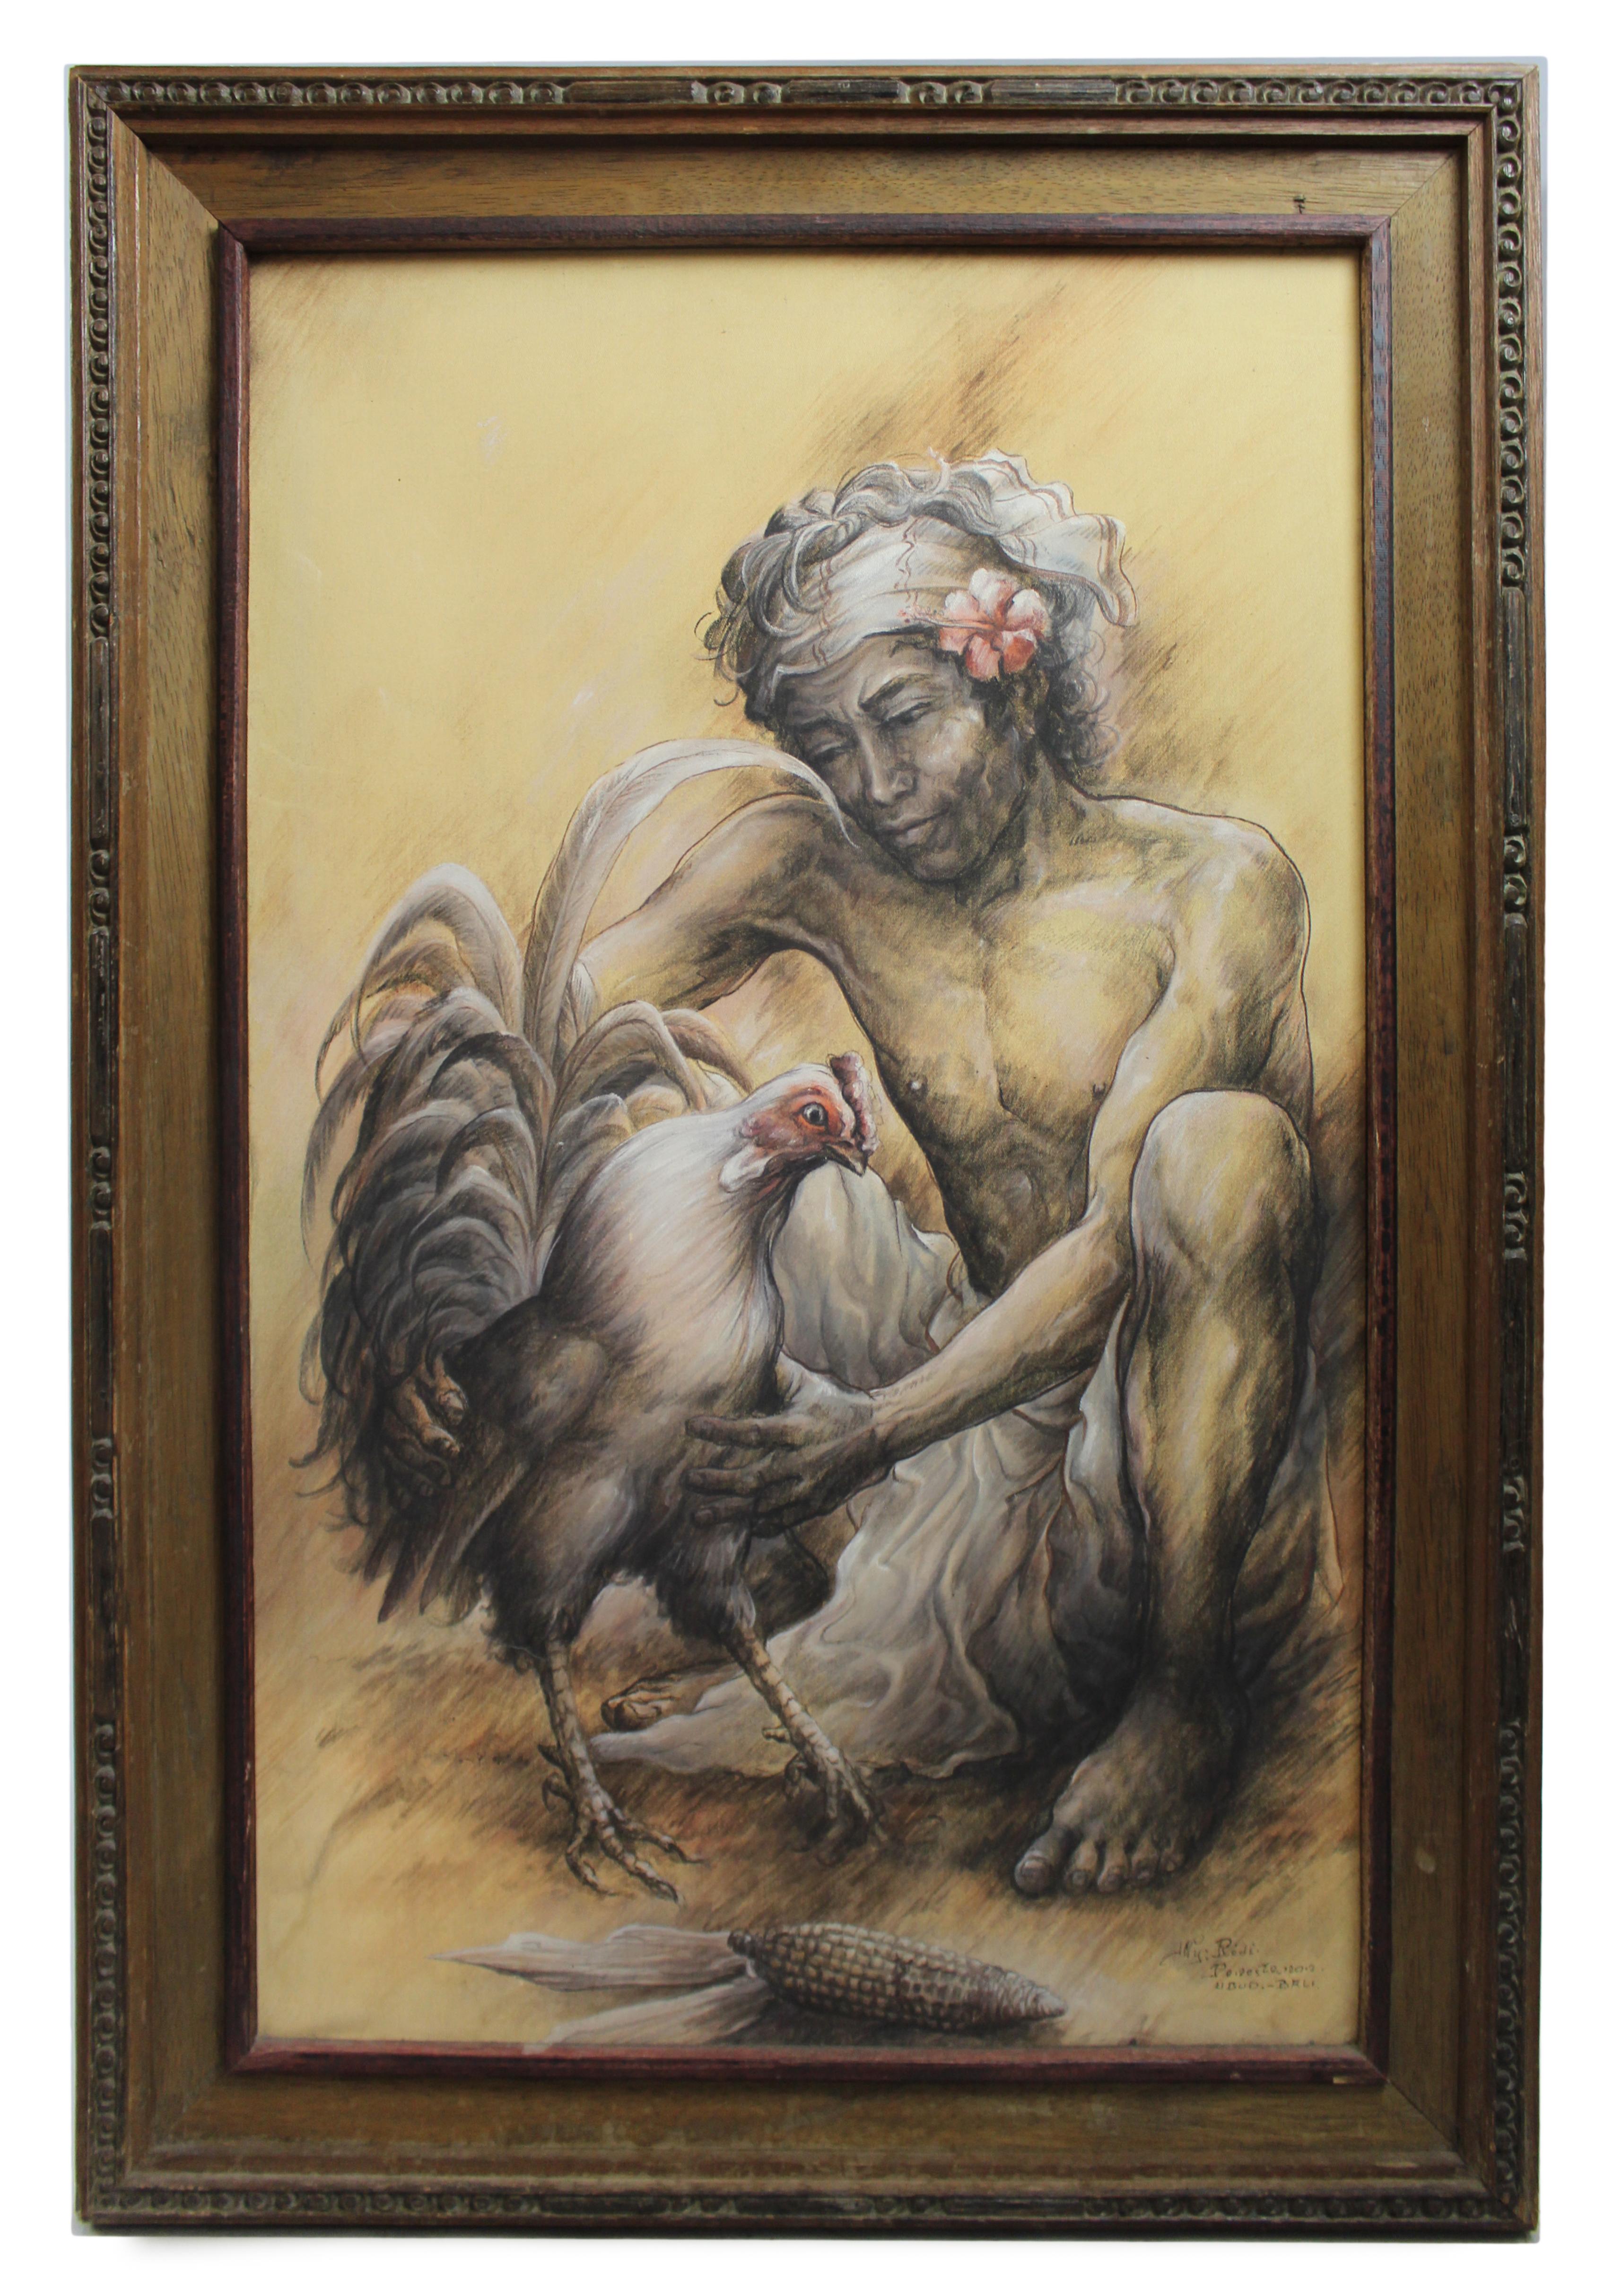 Man & Cockerel by Nyoman Ridi (Indonesian, 1945-)


Period c.1975

Artist Nyoman Ridi (Indonesian, 1945-), signed by the artist to the lower right

Medium Mixed media on canvas

Size Frame measures 71 x 105 cm / 28 x 41 1/2 in 

Frame Set